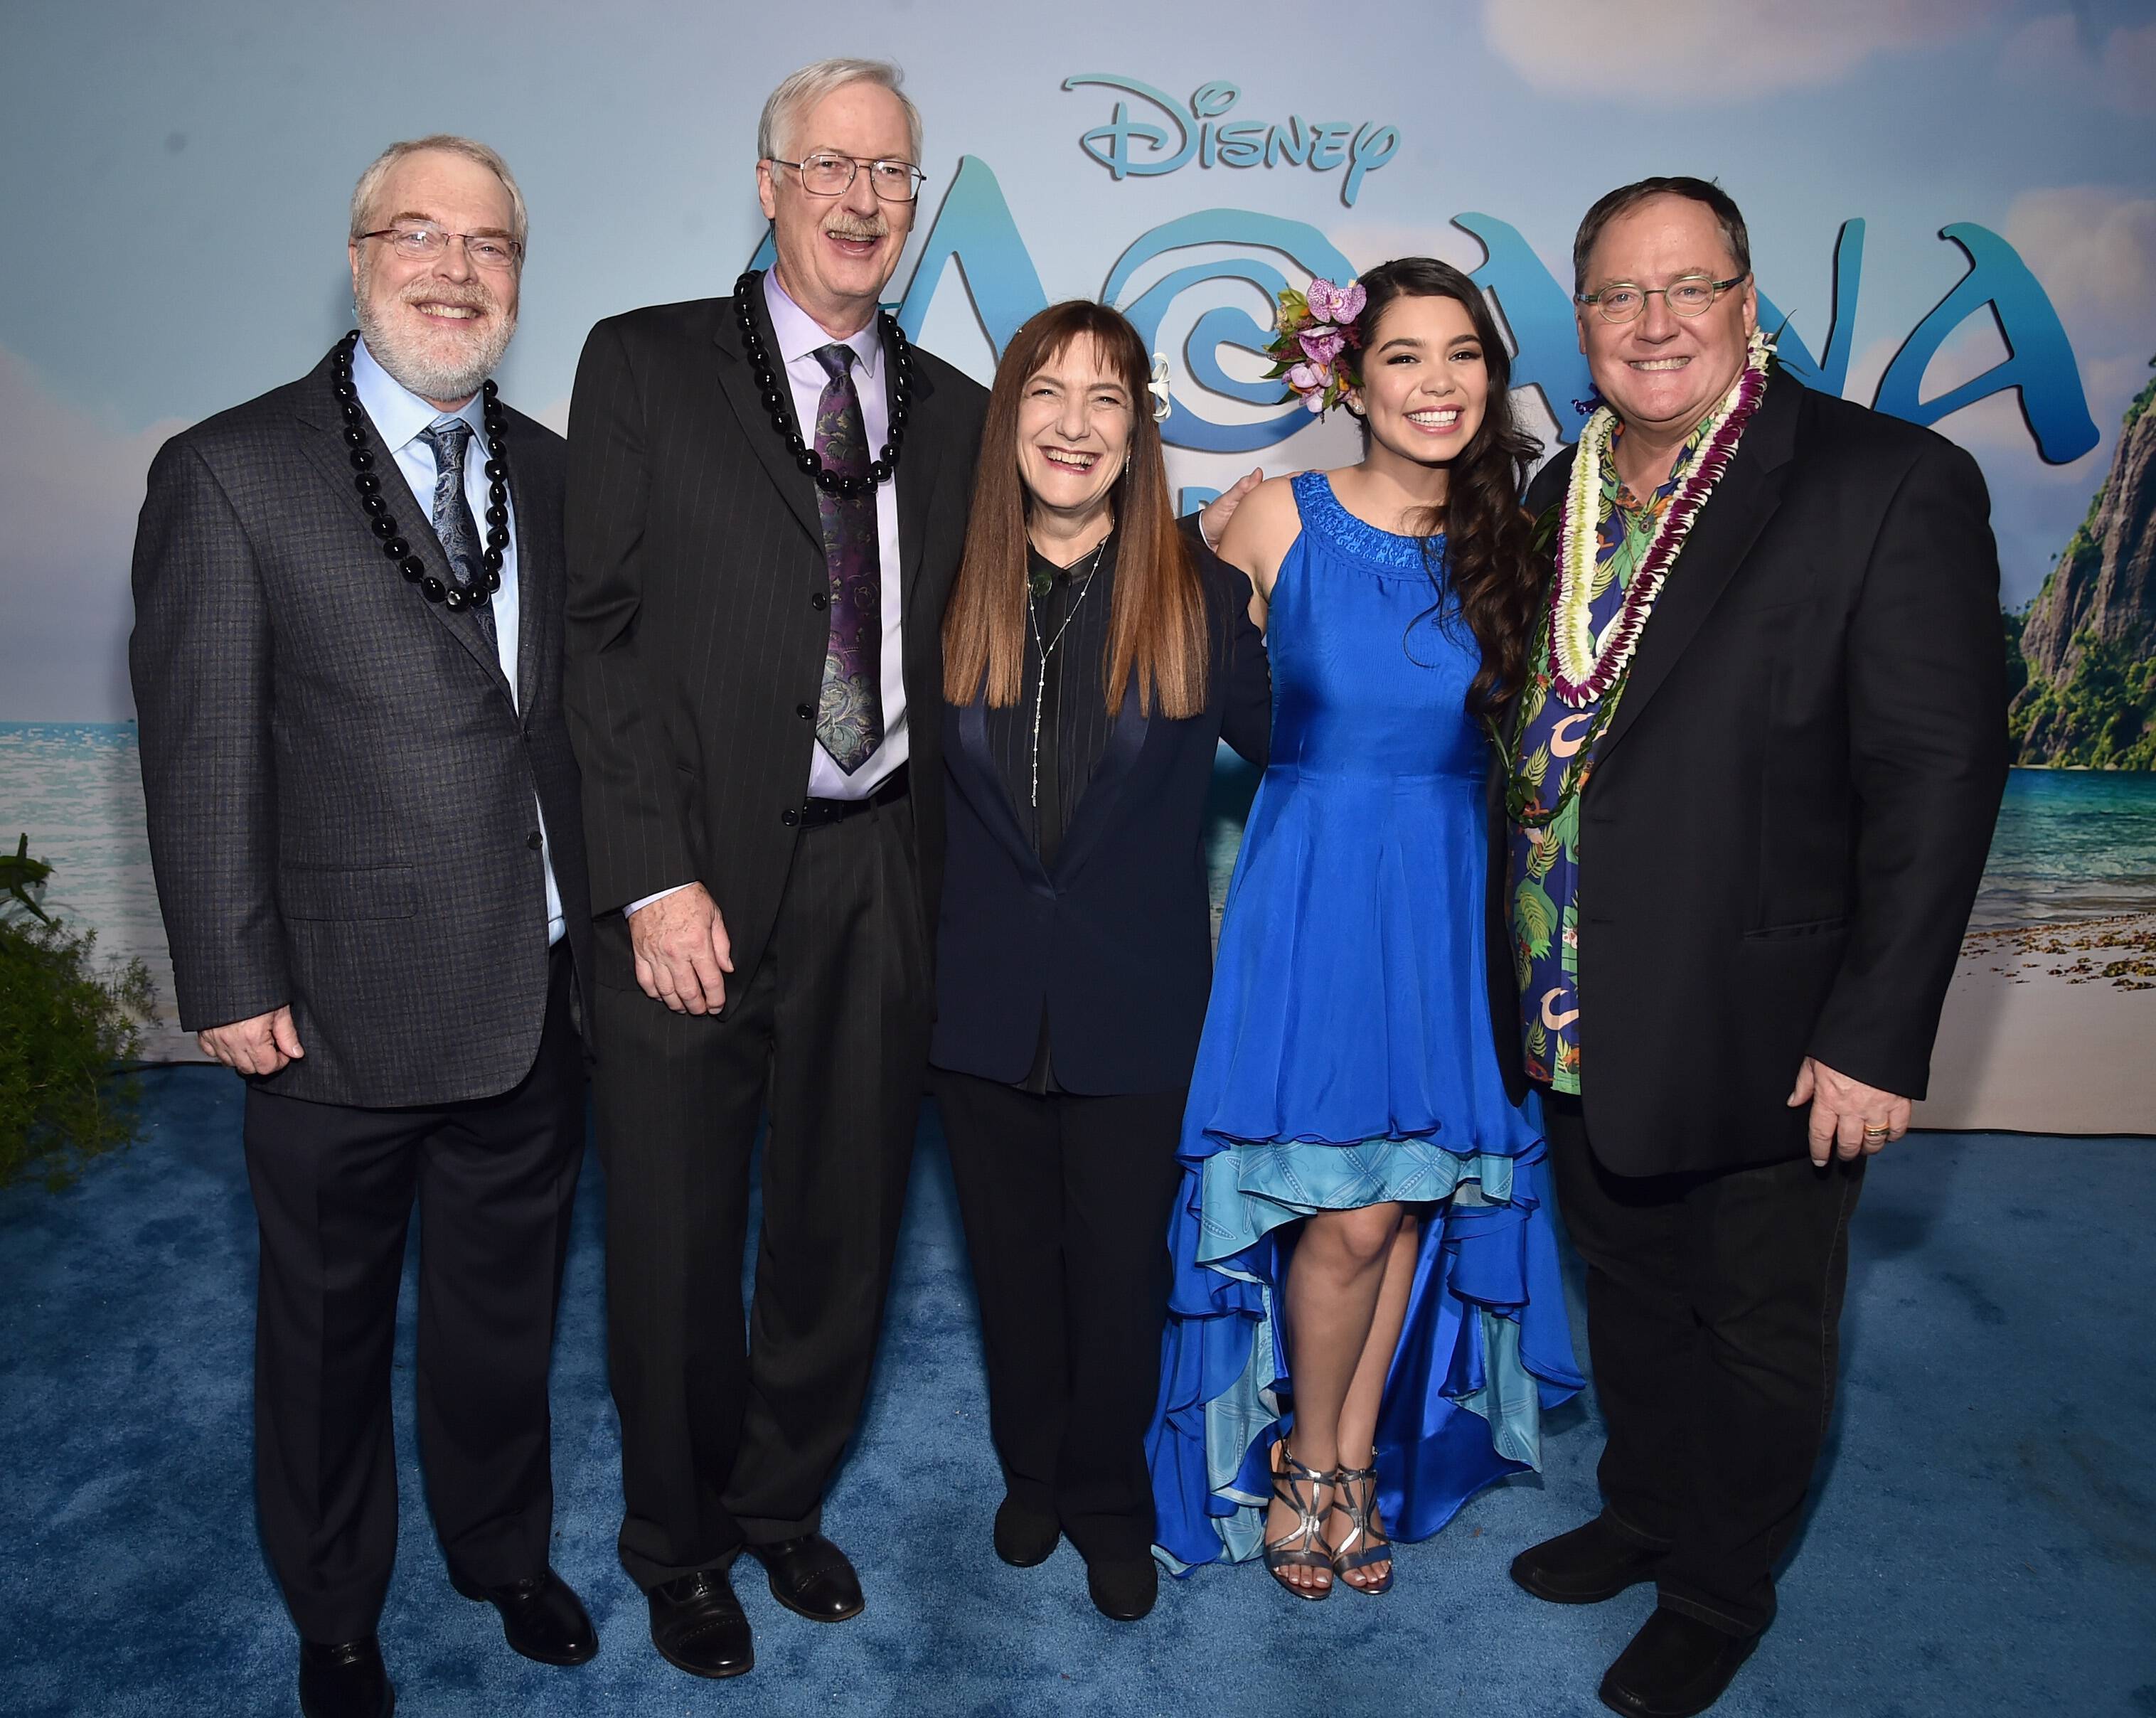 HOLLYWOOD, CA - NOVEMBER 14: (L-R) Directors Ron Clements and John Musker, producer Osnat Shurer, actress Auli'i Cravalho and executive producer John Lasseter attend The World Premiere of Disneys "MOANA" at the El Capitan Theatre on Monday, November 14, 2016 in Hollywood, CA. (Photo by Alberto E. Rodriguez/Getty Images for Disney) *** Local Caption *** Ron Clements; John Musker; Osnat Shurer; Auli'i Cravalho; John Lasseter